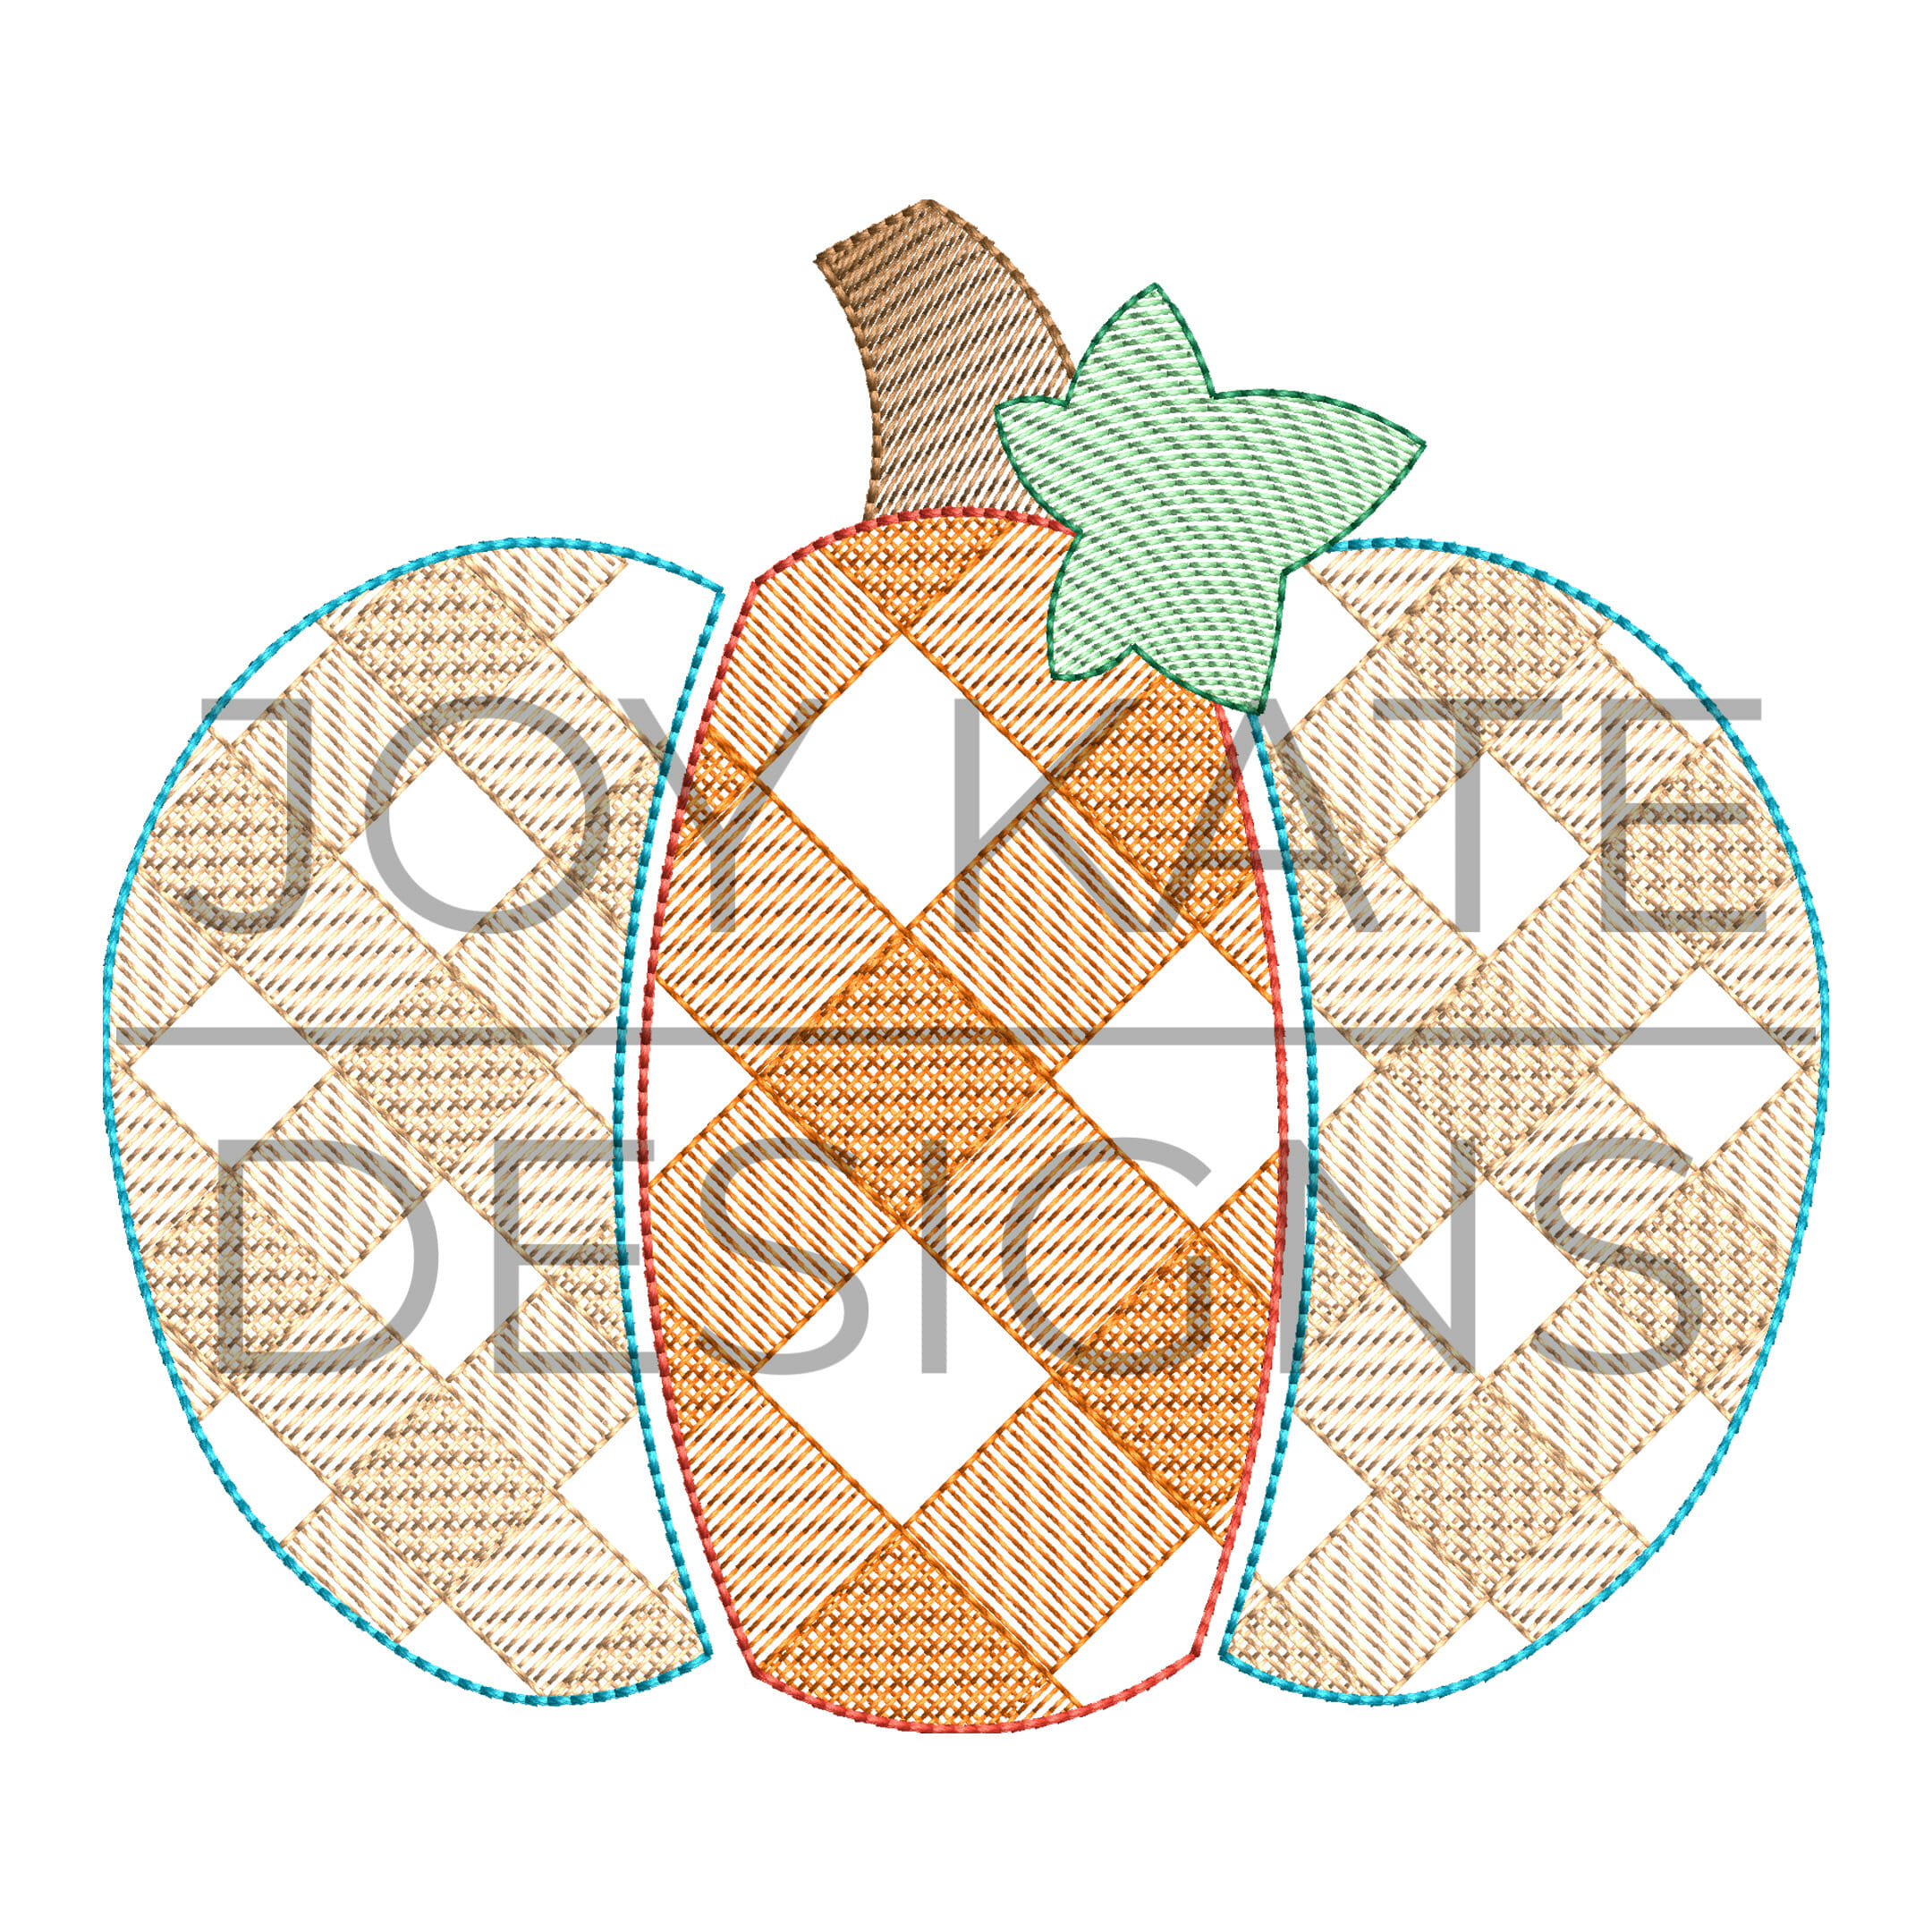 Gingham Embroidery Patterns Gingham Pumpkin Sketch Embroidery Design